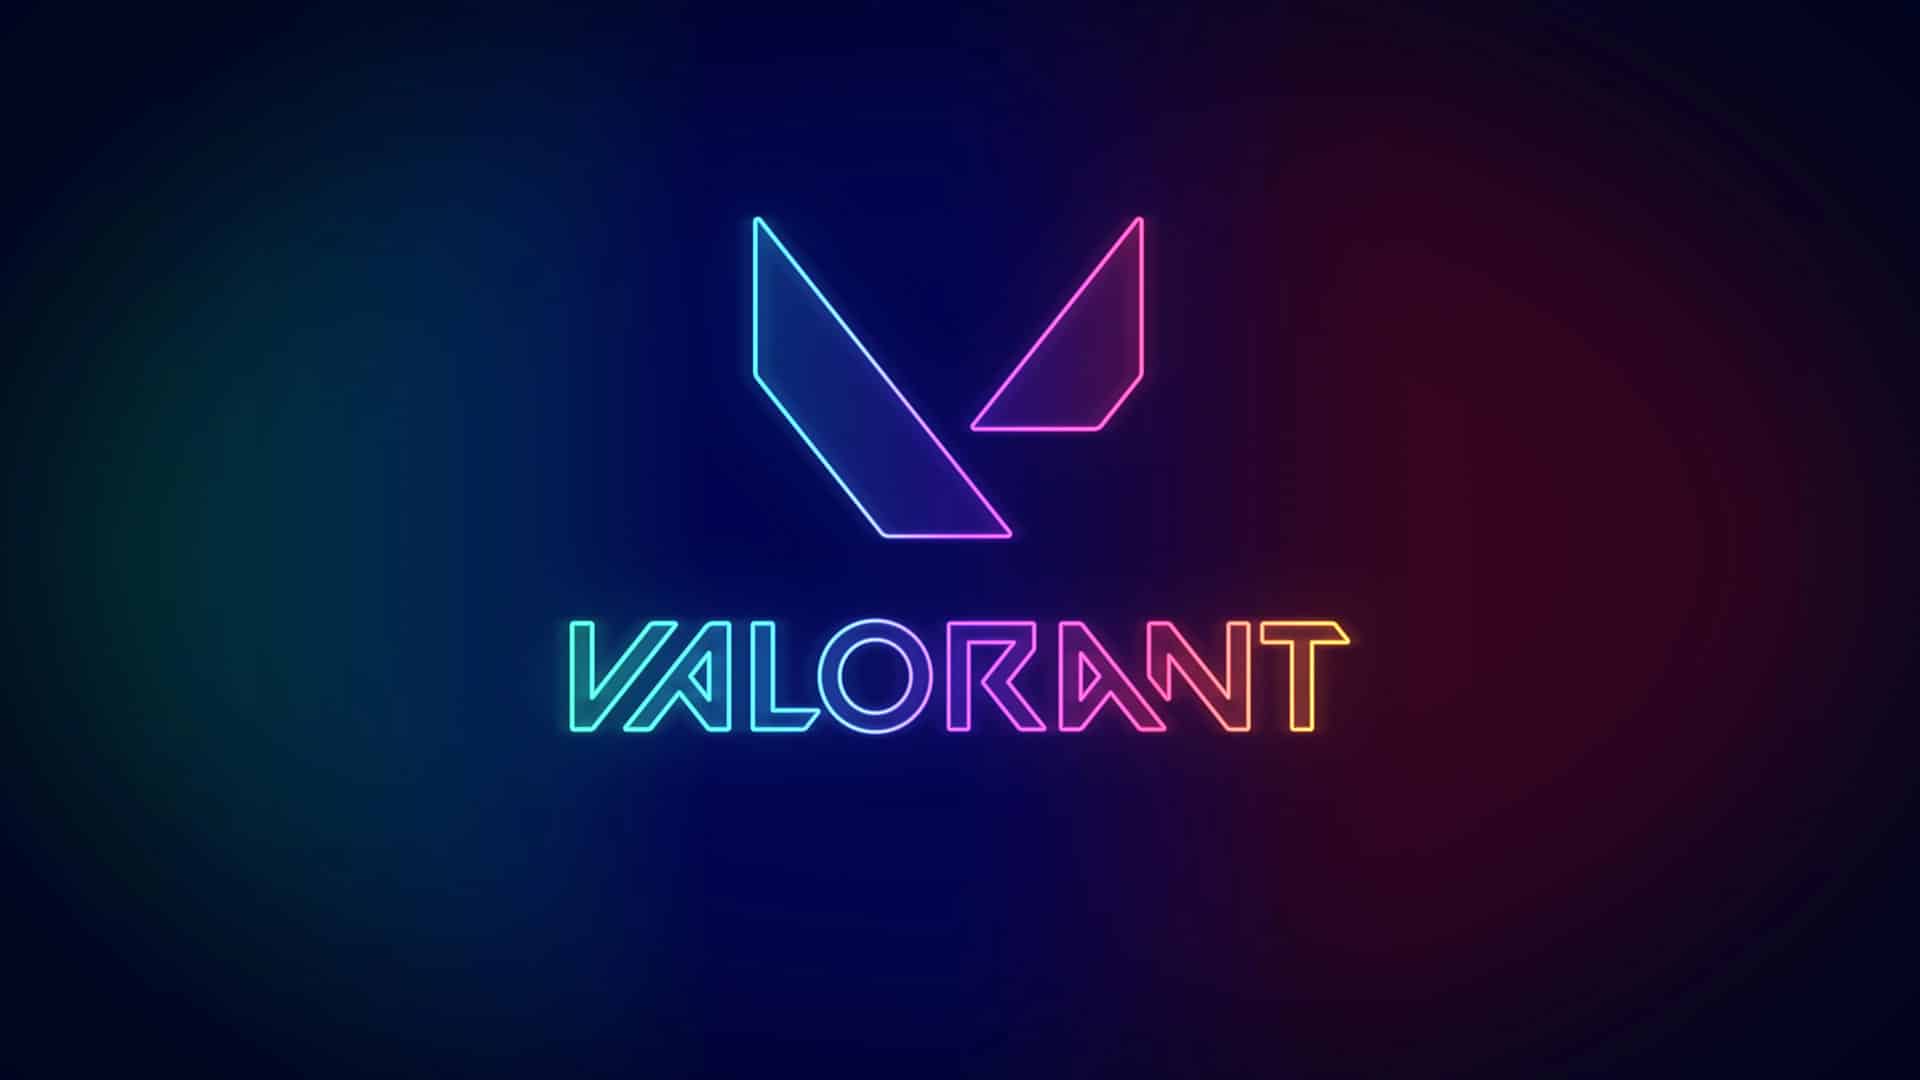 Valorant wallpaper Image by techguur – The Valorant logo depicted as a neon-like sign.